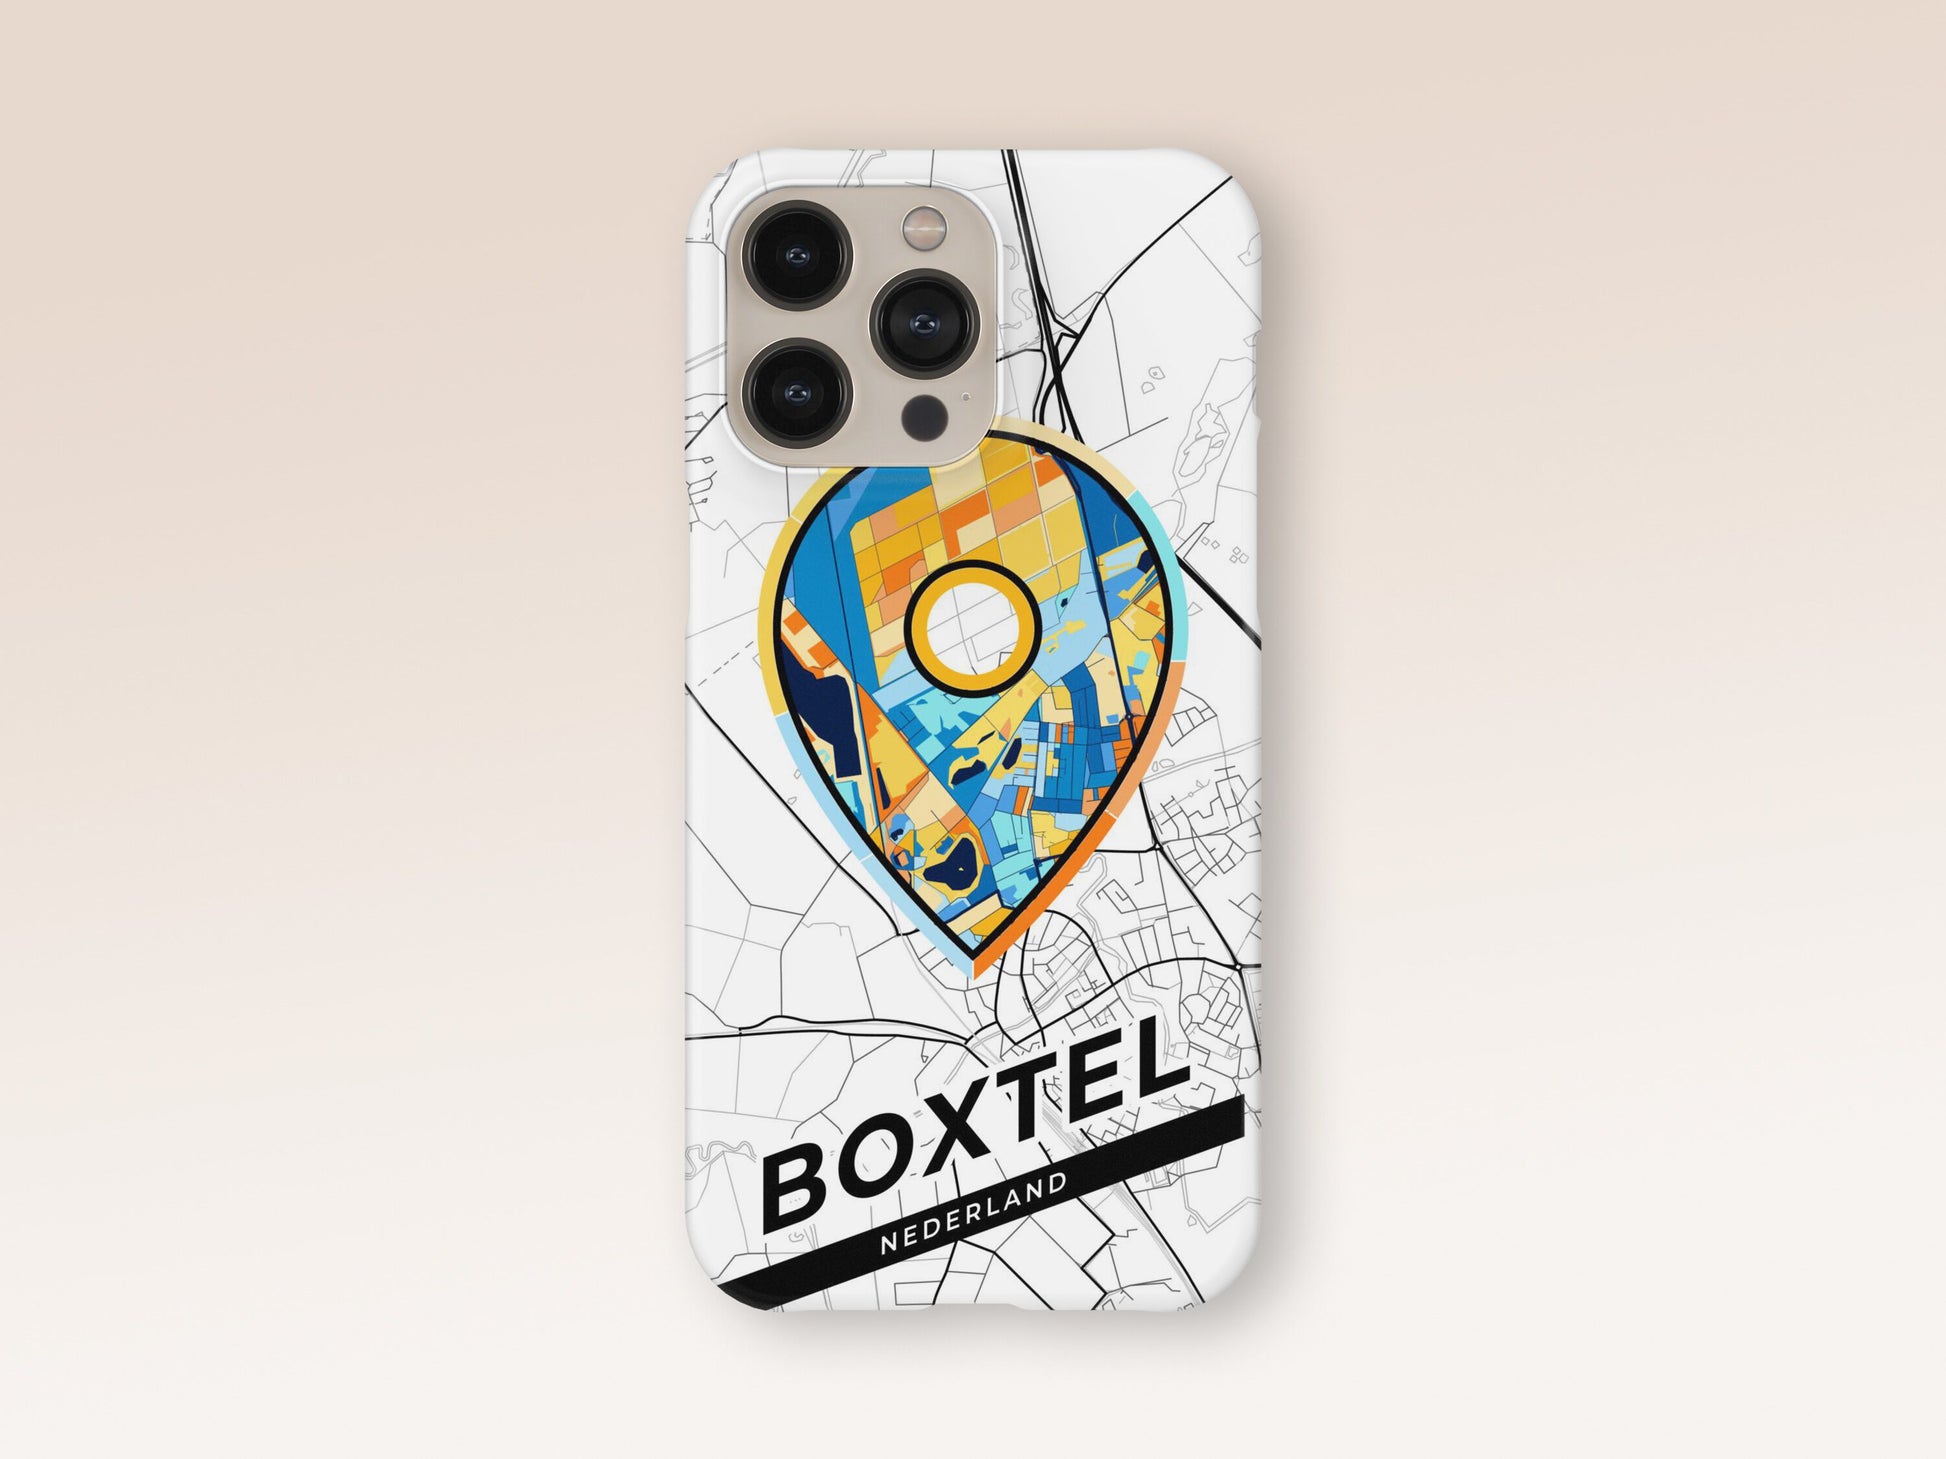 Boxtel Netherlands slim phone case with colorful icon. Birthday, wedding or housewarming gift. Couple match cases. 1